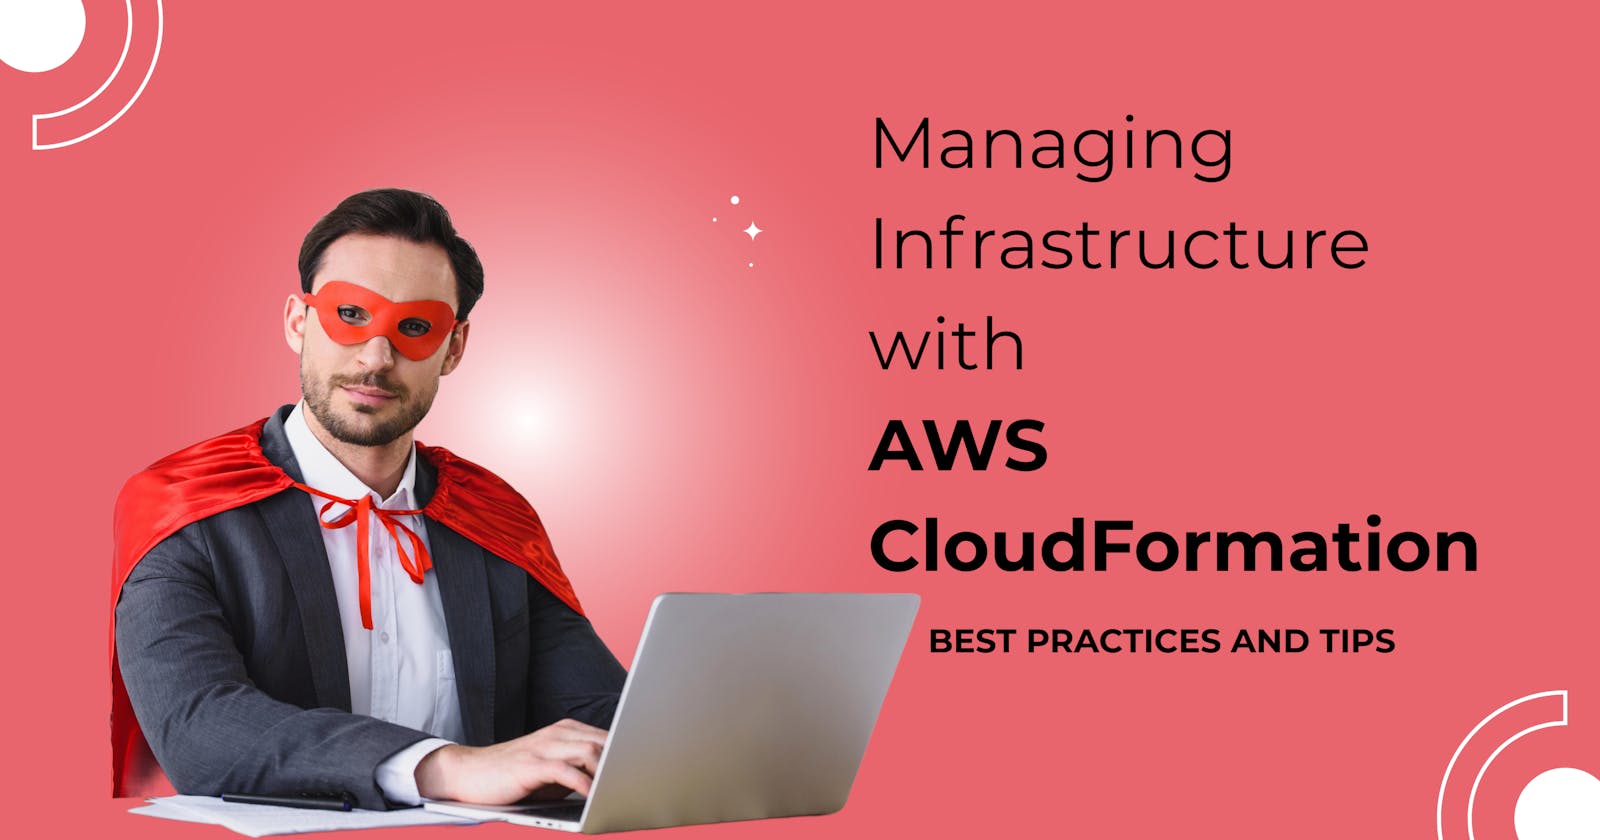 Managing Infrastructure with AWS CloudFormation